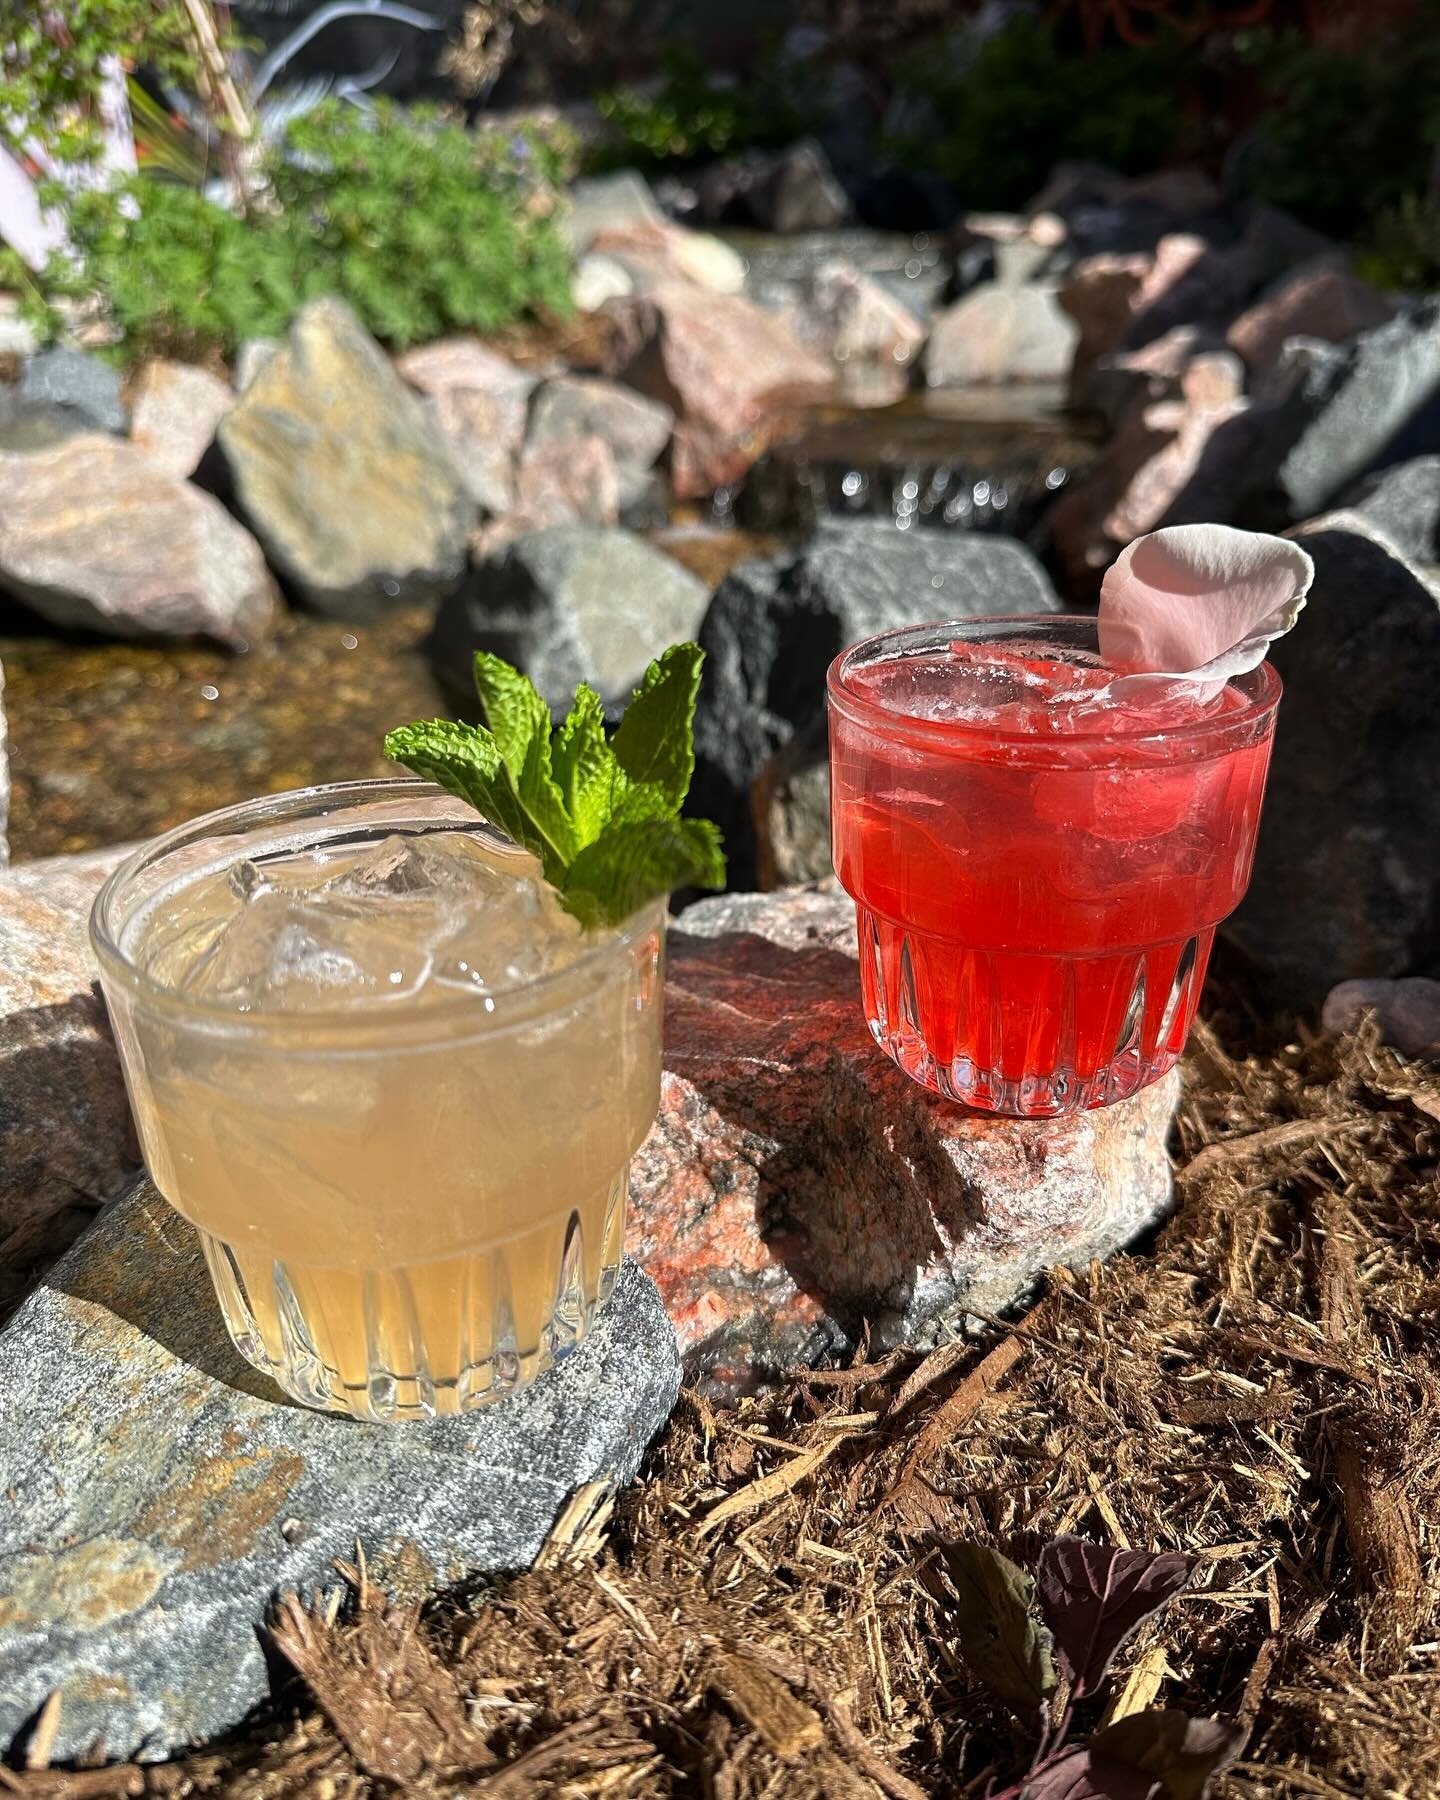 We have two new house tonics for you to try today! The right is a refreshing mix of orange and rose, the left is mint, lavender and lime! Both served with delicious @suntory_rokugin Come on in and try one today while supplies last!